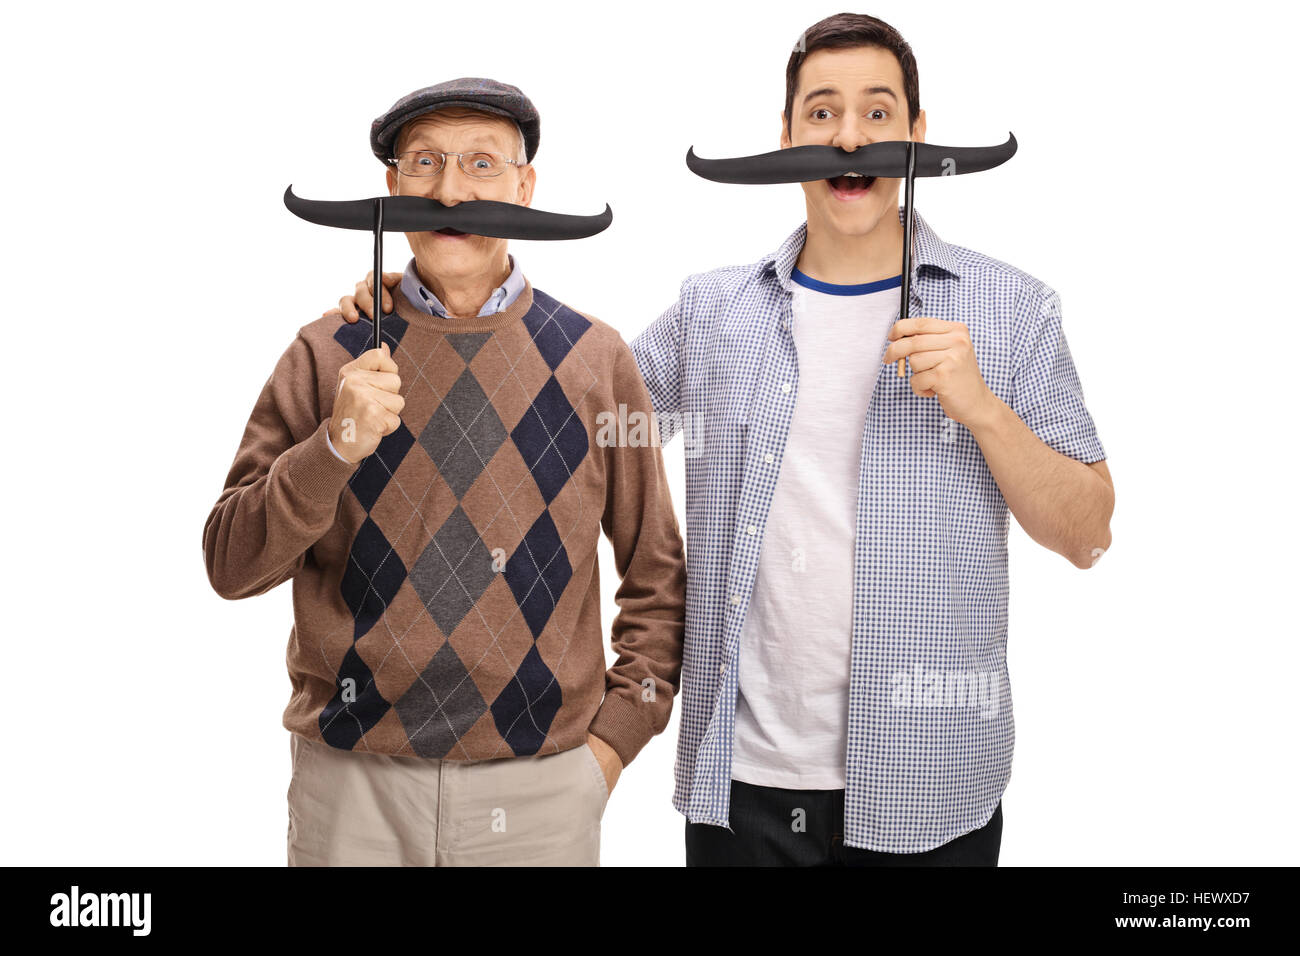 Senior and a young man posing with big fake moustaches isolated on white background Stock Photo